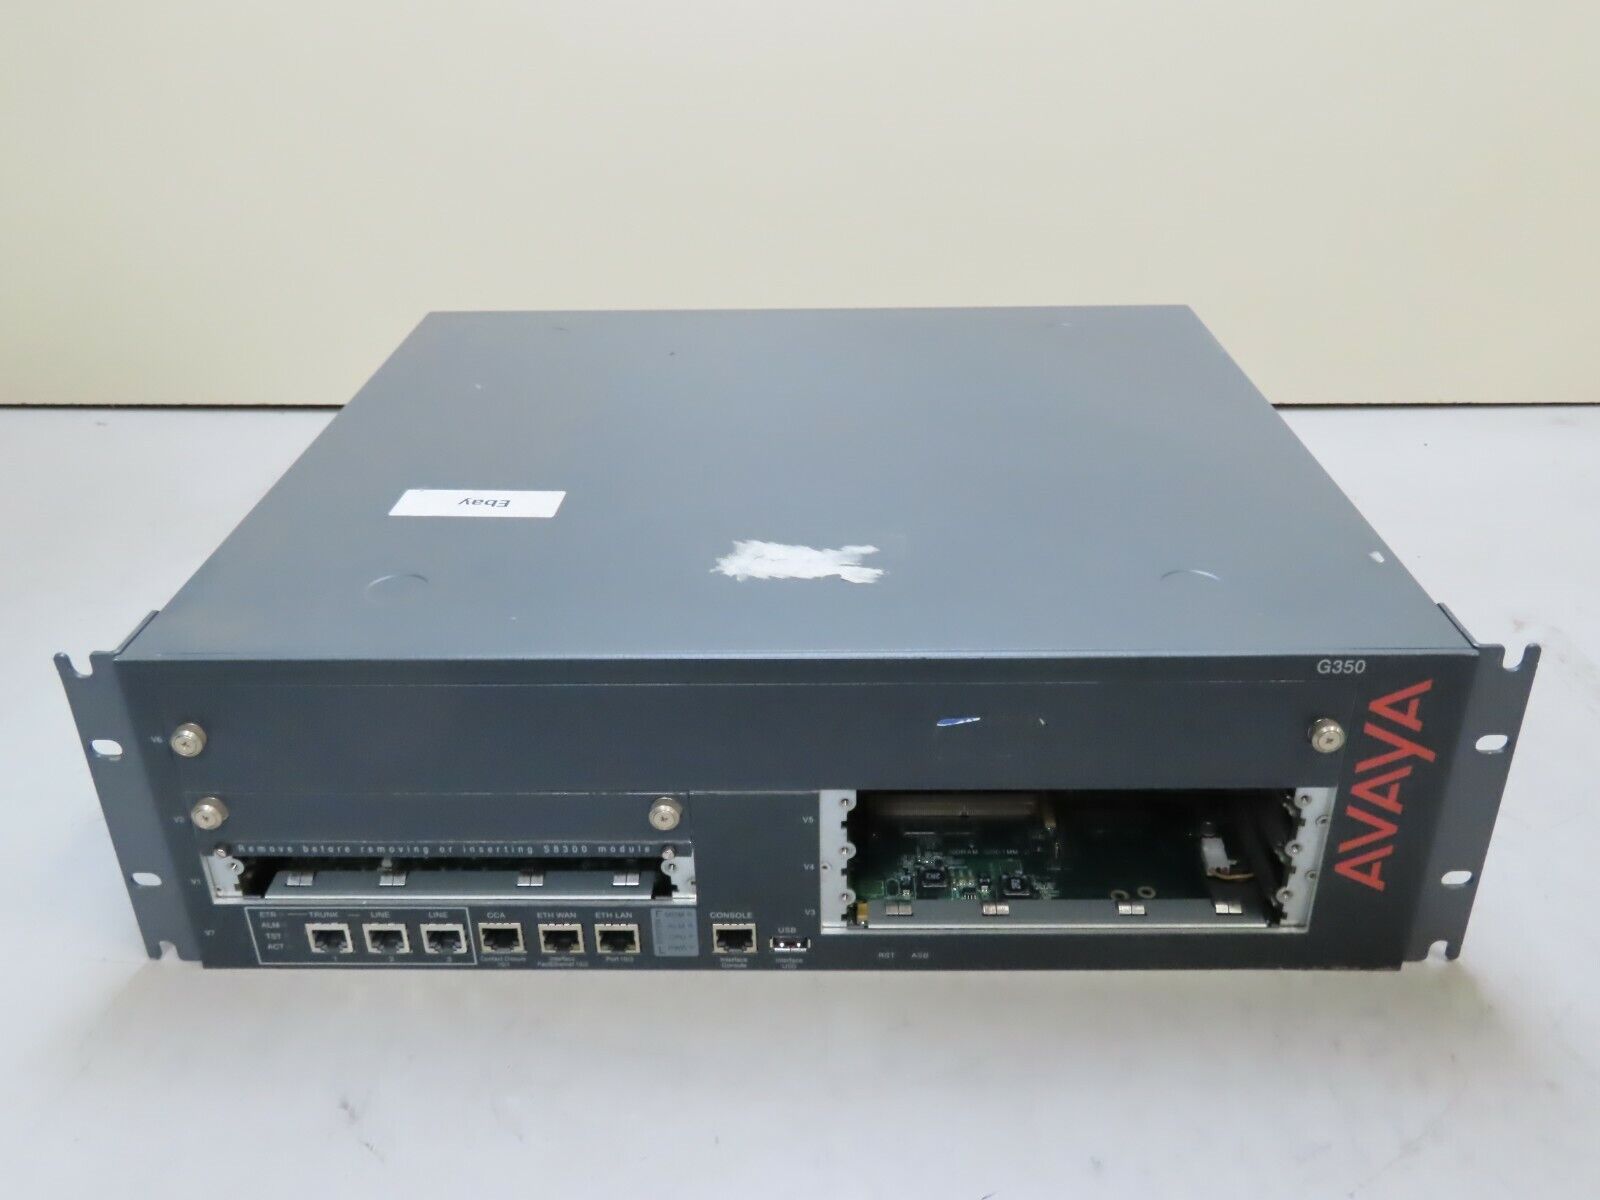 Avaya G350 700397078 Media Gateway Cabinet ( Alarm ) As-Is for PARTS